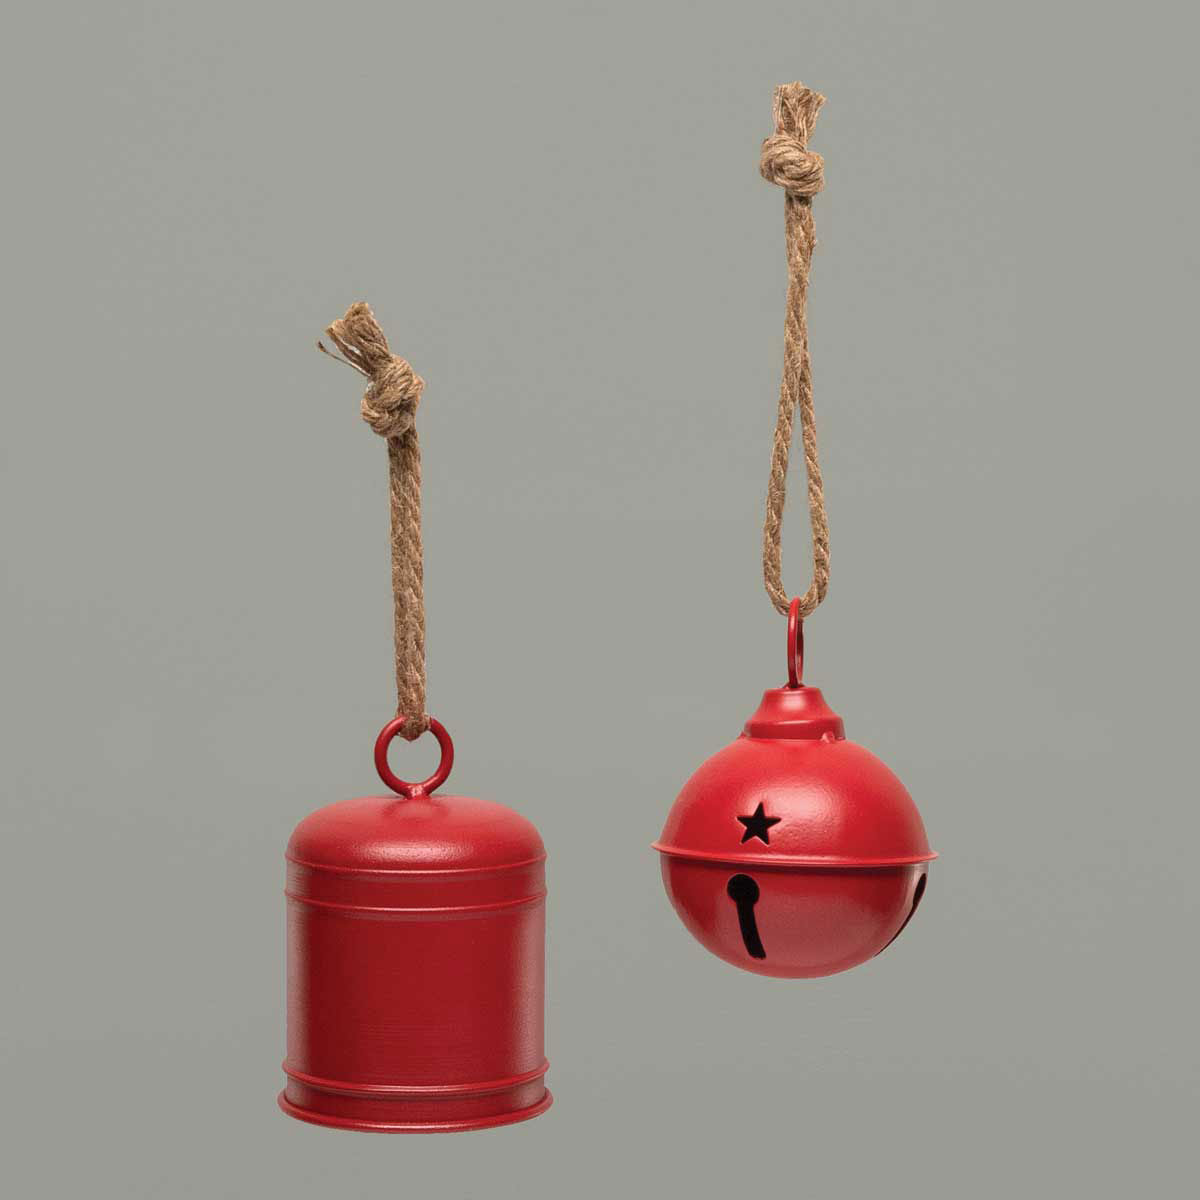 BELL SLEIGH/JINGLE MATTE RED 4IN X 5IN METAL WITH ROPE HANGER